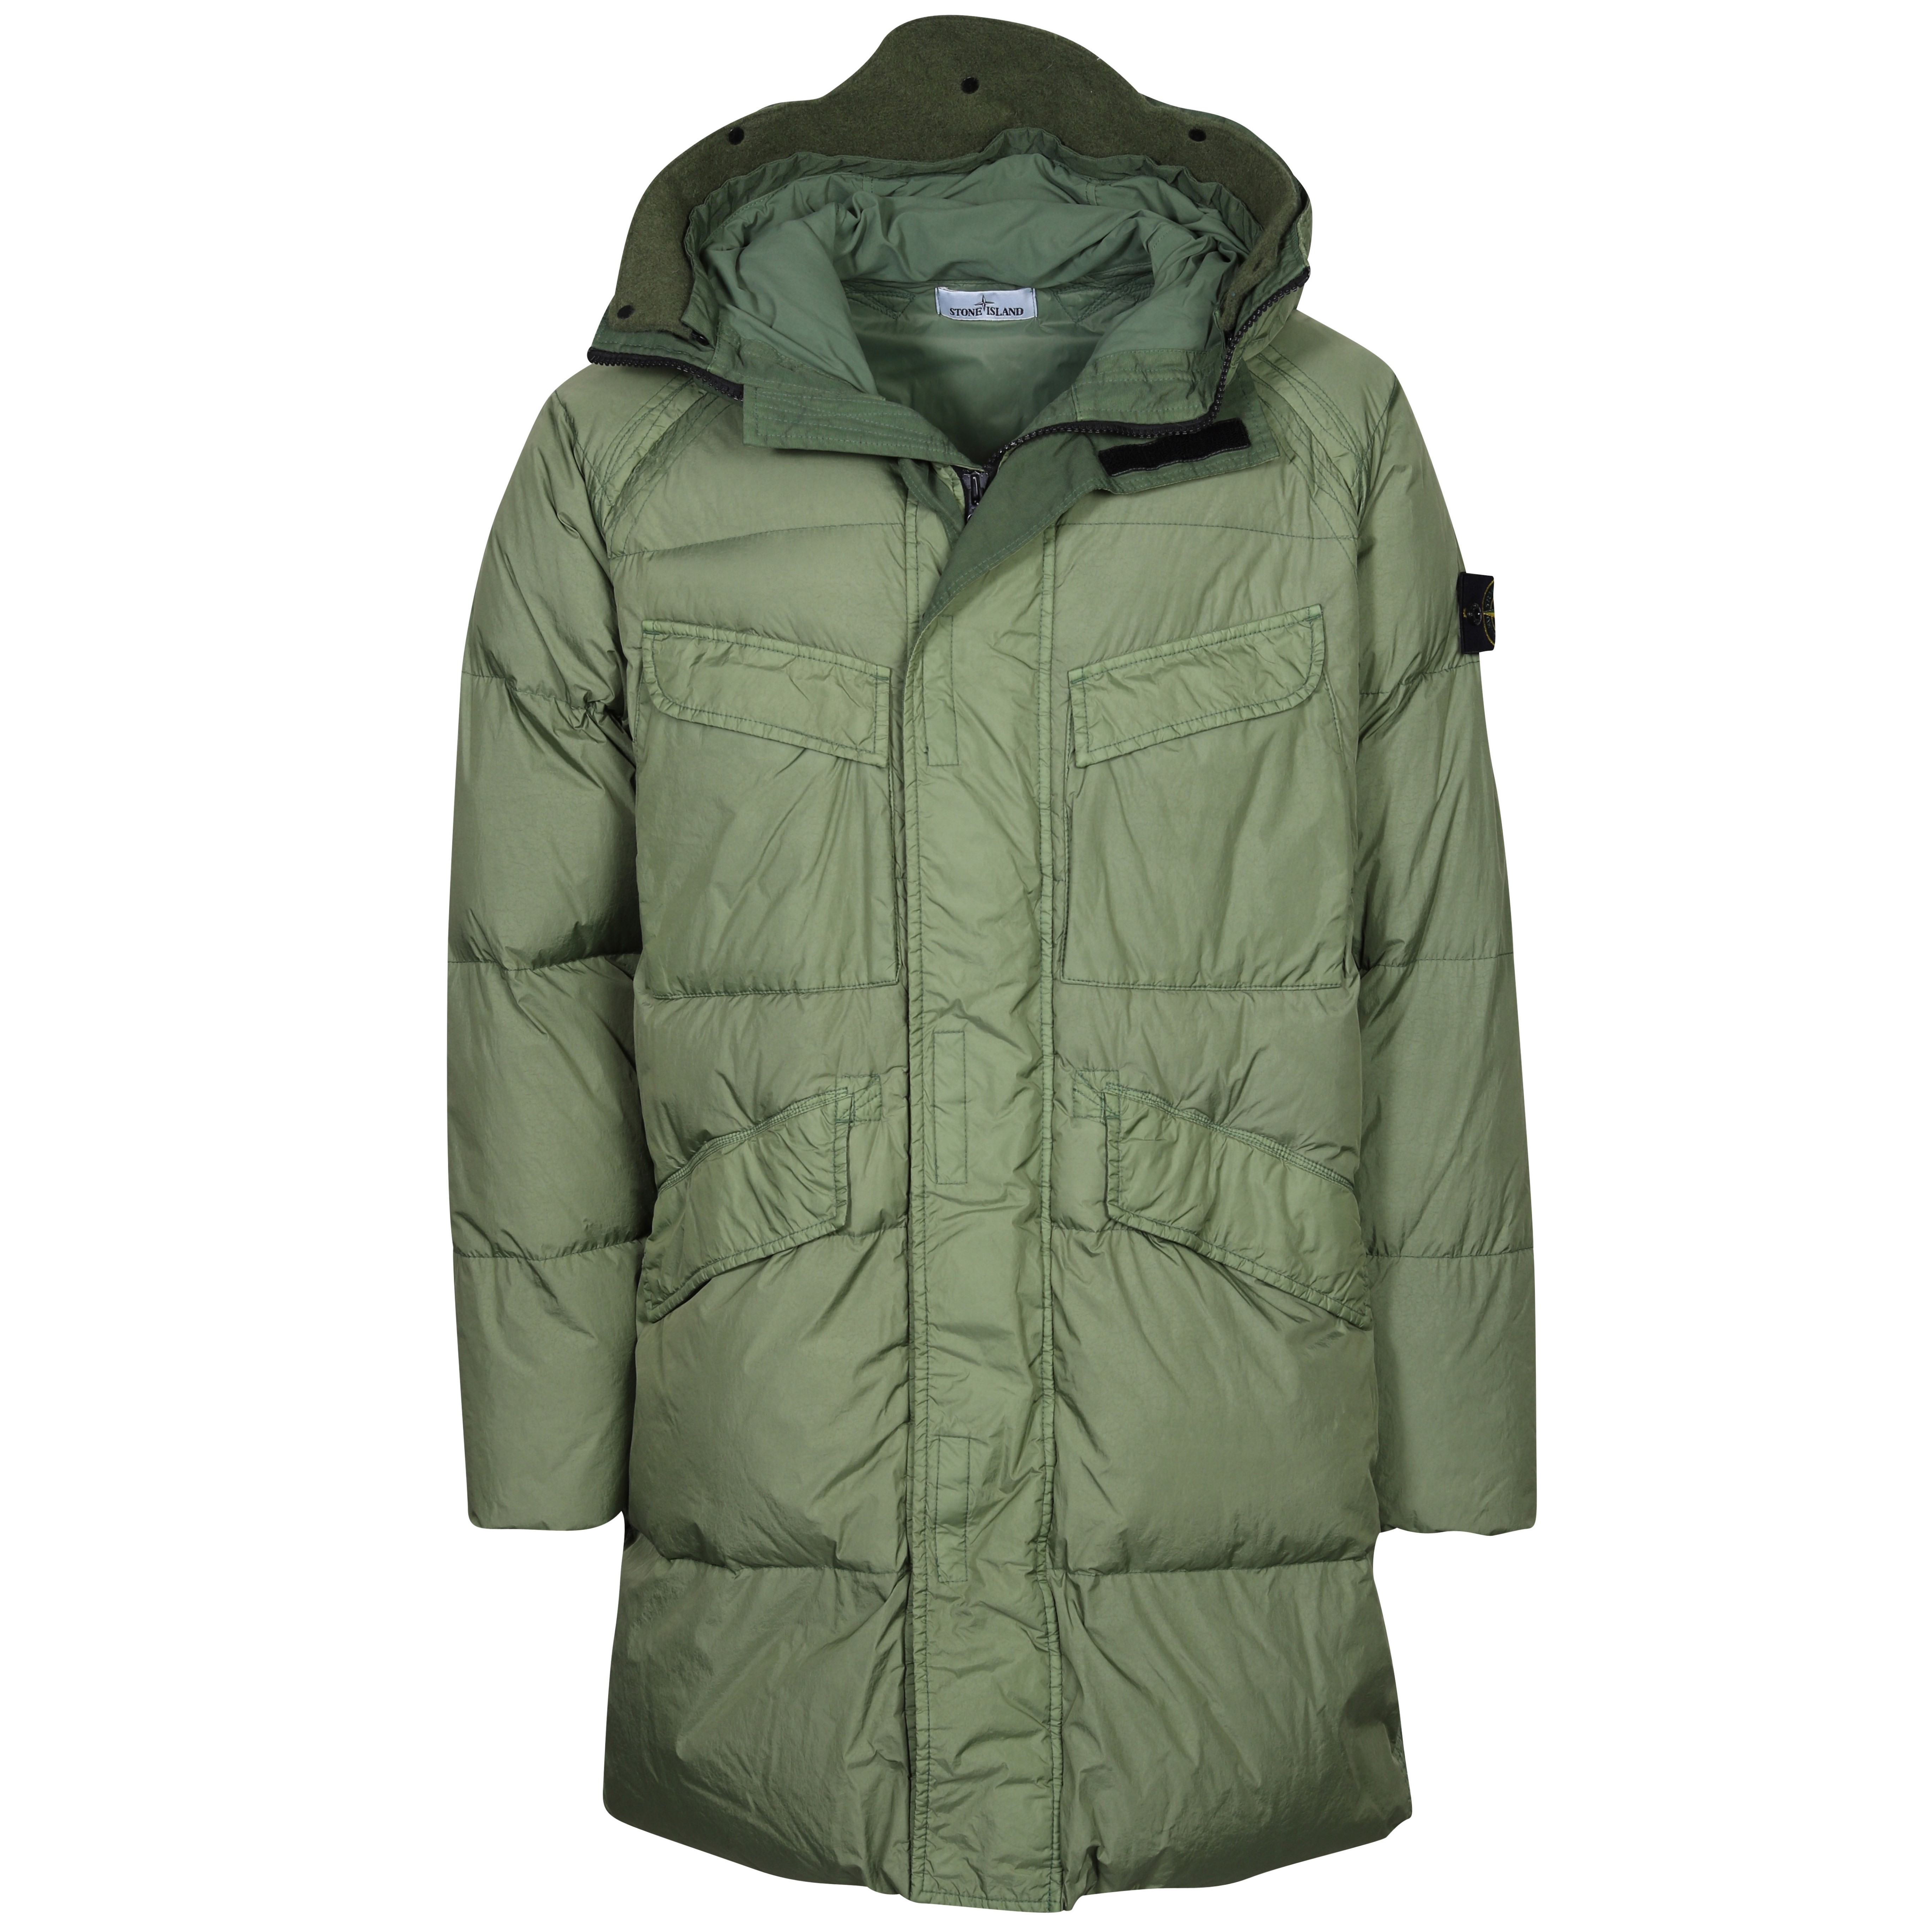 Stone Island Garment Dyed Crincle Reps Ny Down Parka in Olive